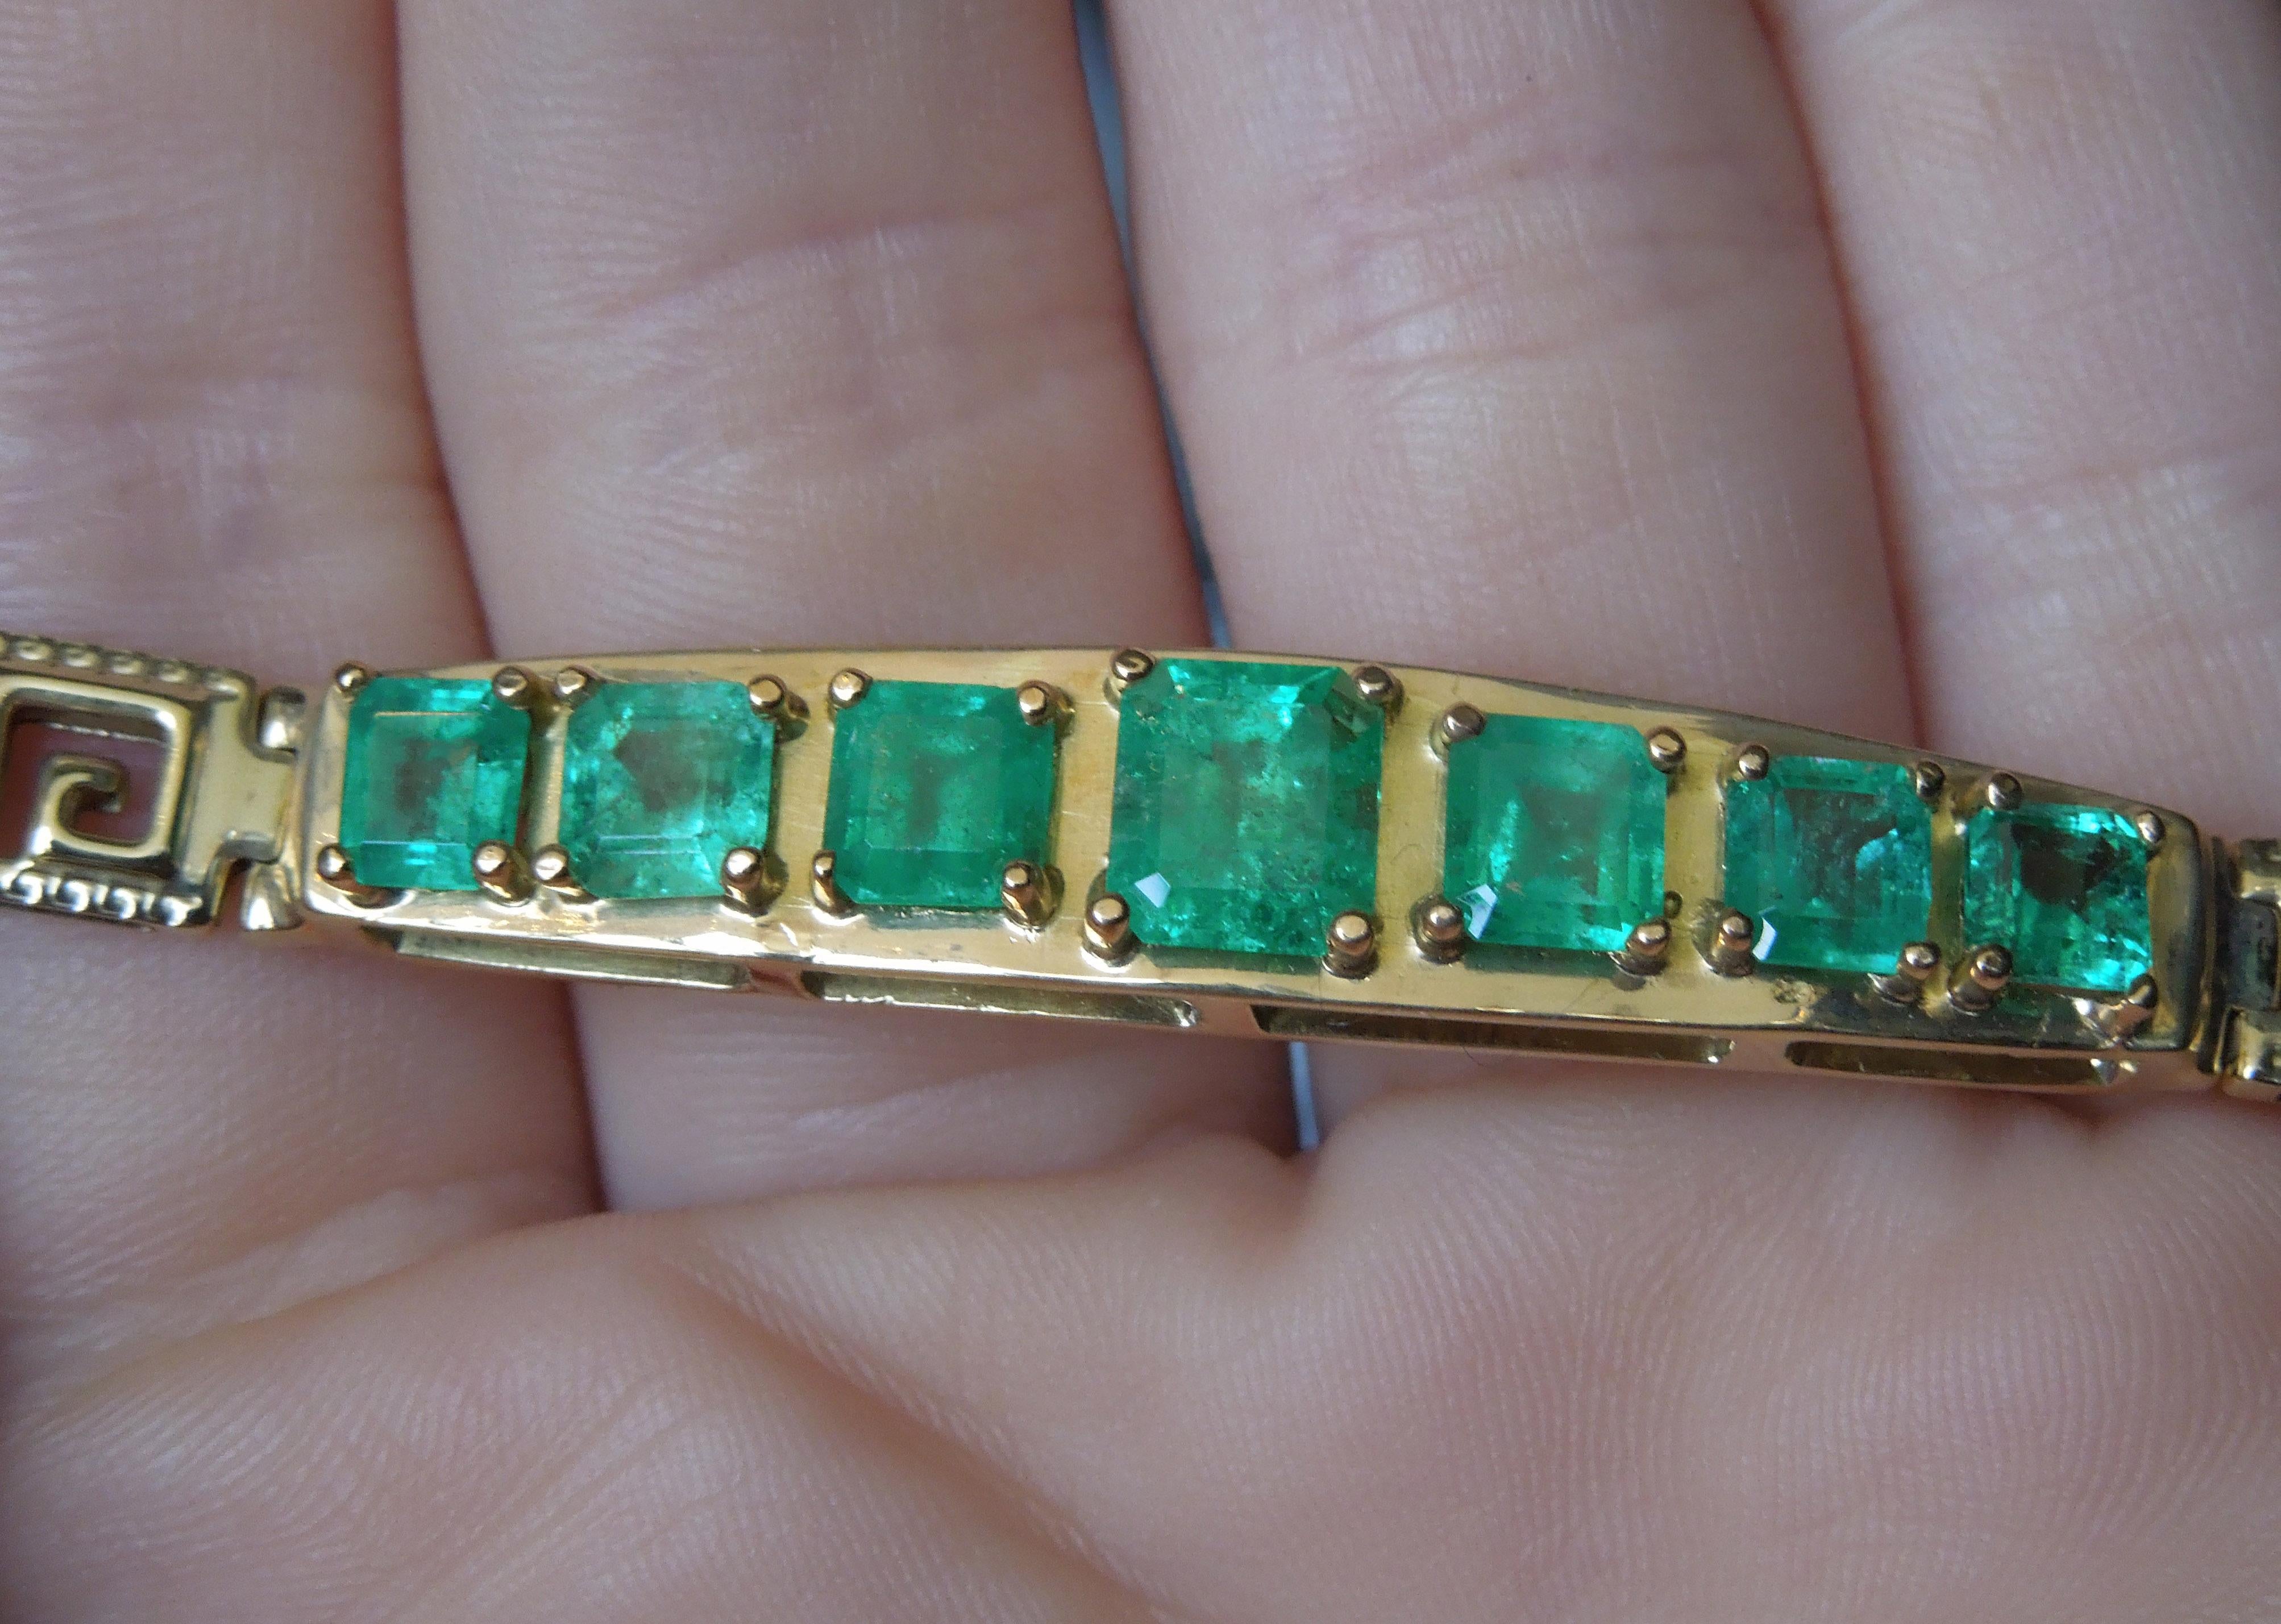 In a Unisex design, this 14 Karat Yellow Gold Greek Key Emerald Bracelet features 7 Graduating Square Emerald cut Natural Colombian Emeralds totaling approximately 7 carats, each secured in a 4-Prong setting .. [nearly the same shade of Jacqueline